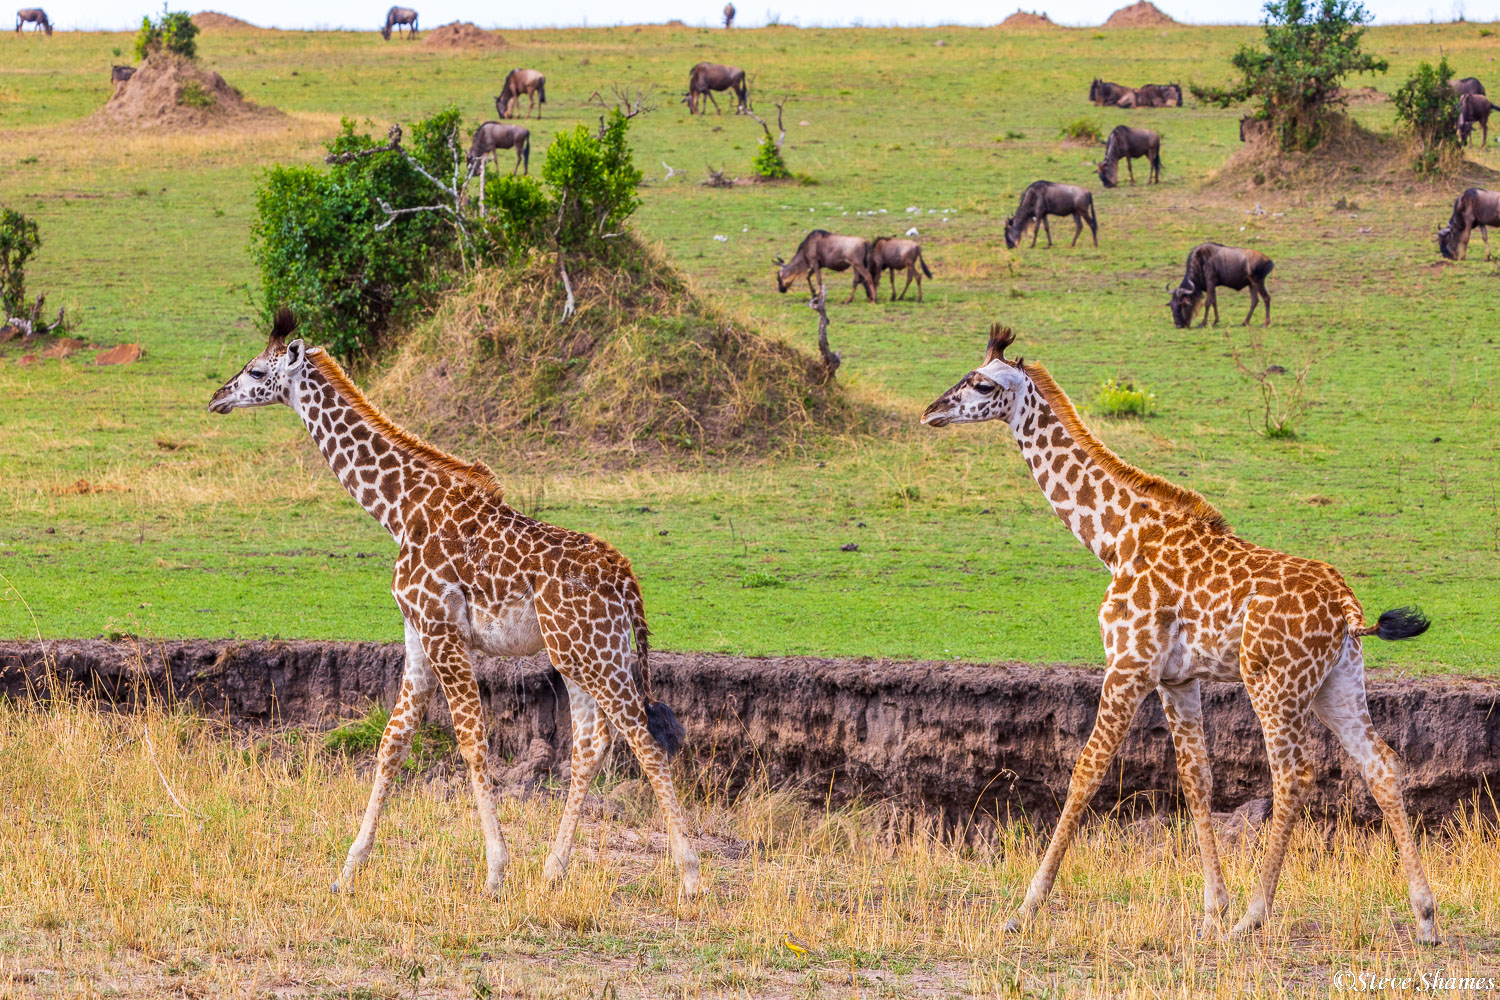 Giraffes out walking, crossing a landscape of wildebeests and termite mounds.